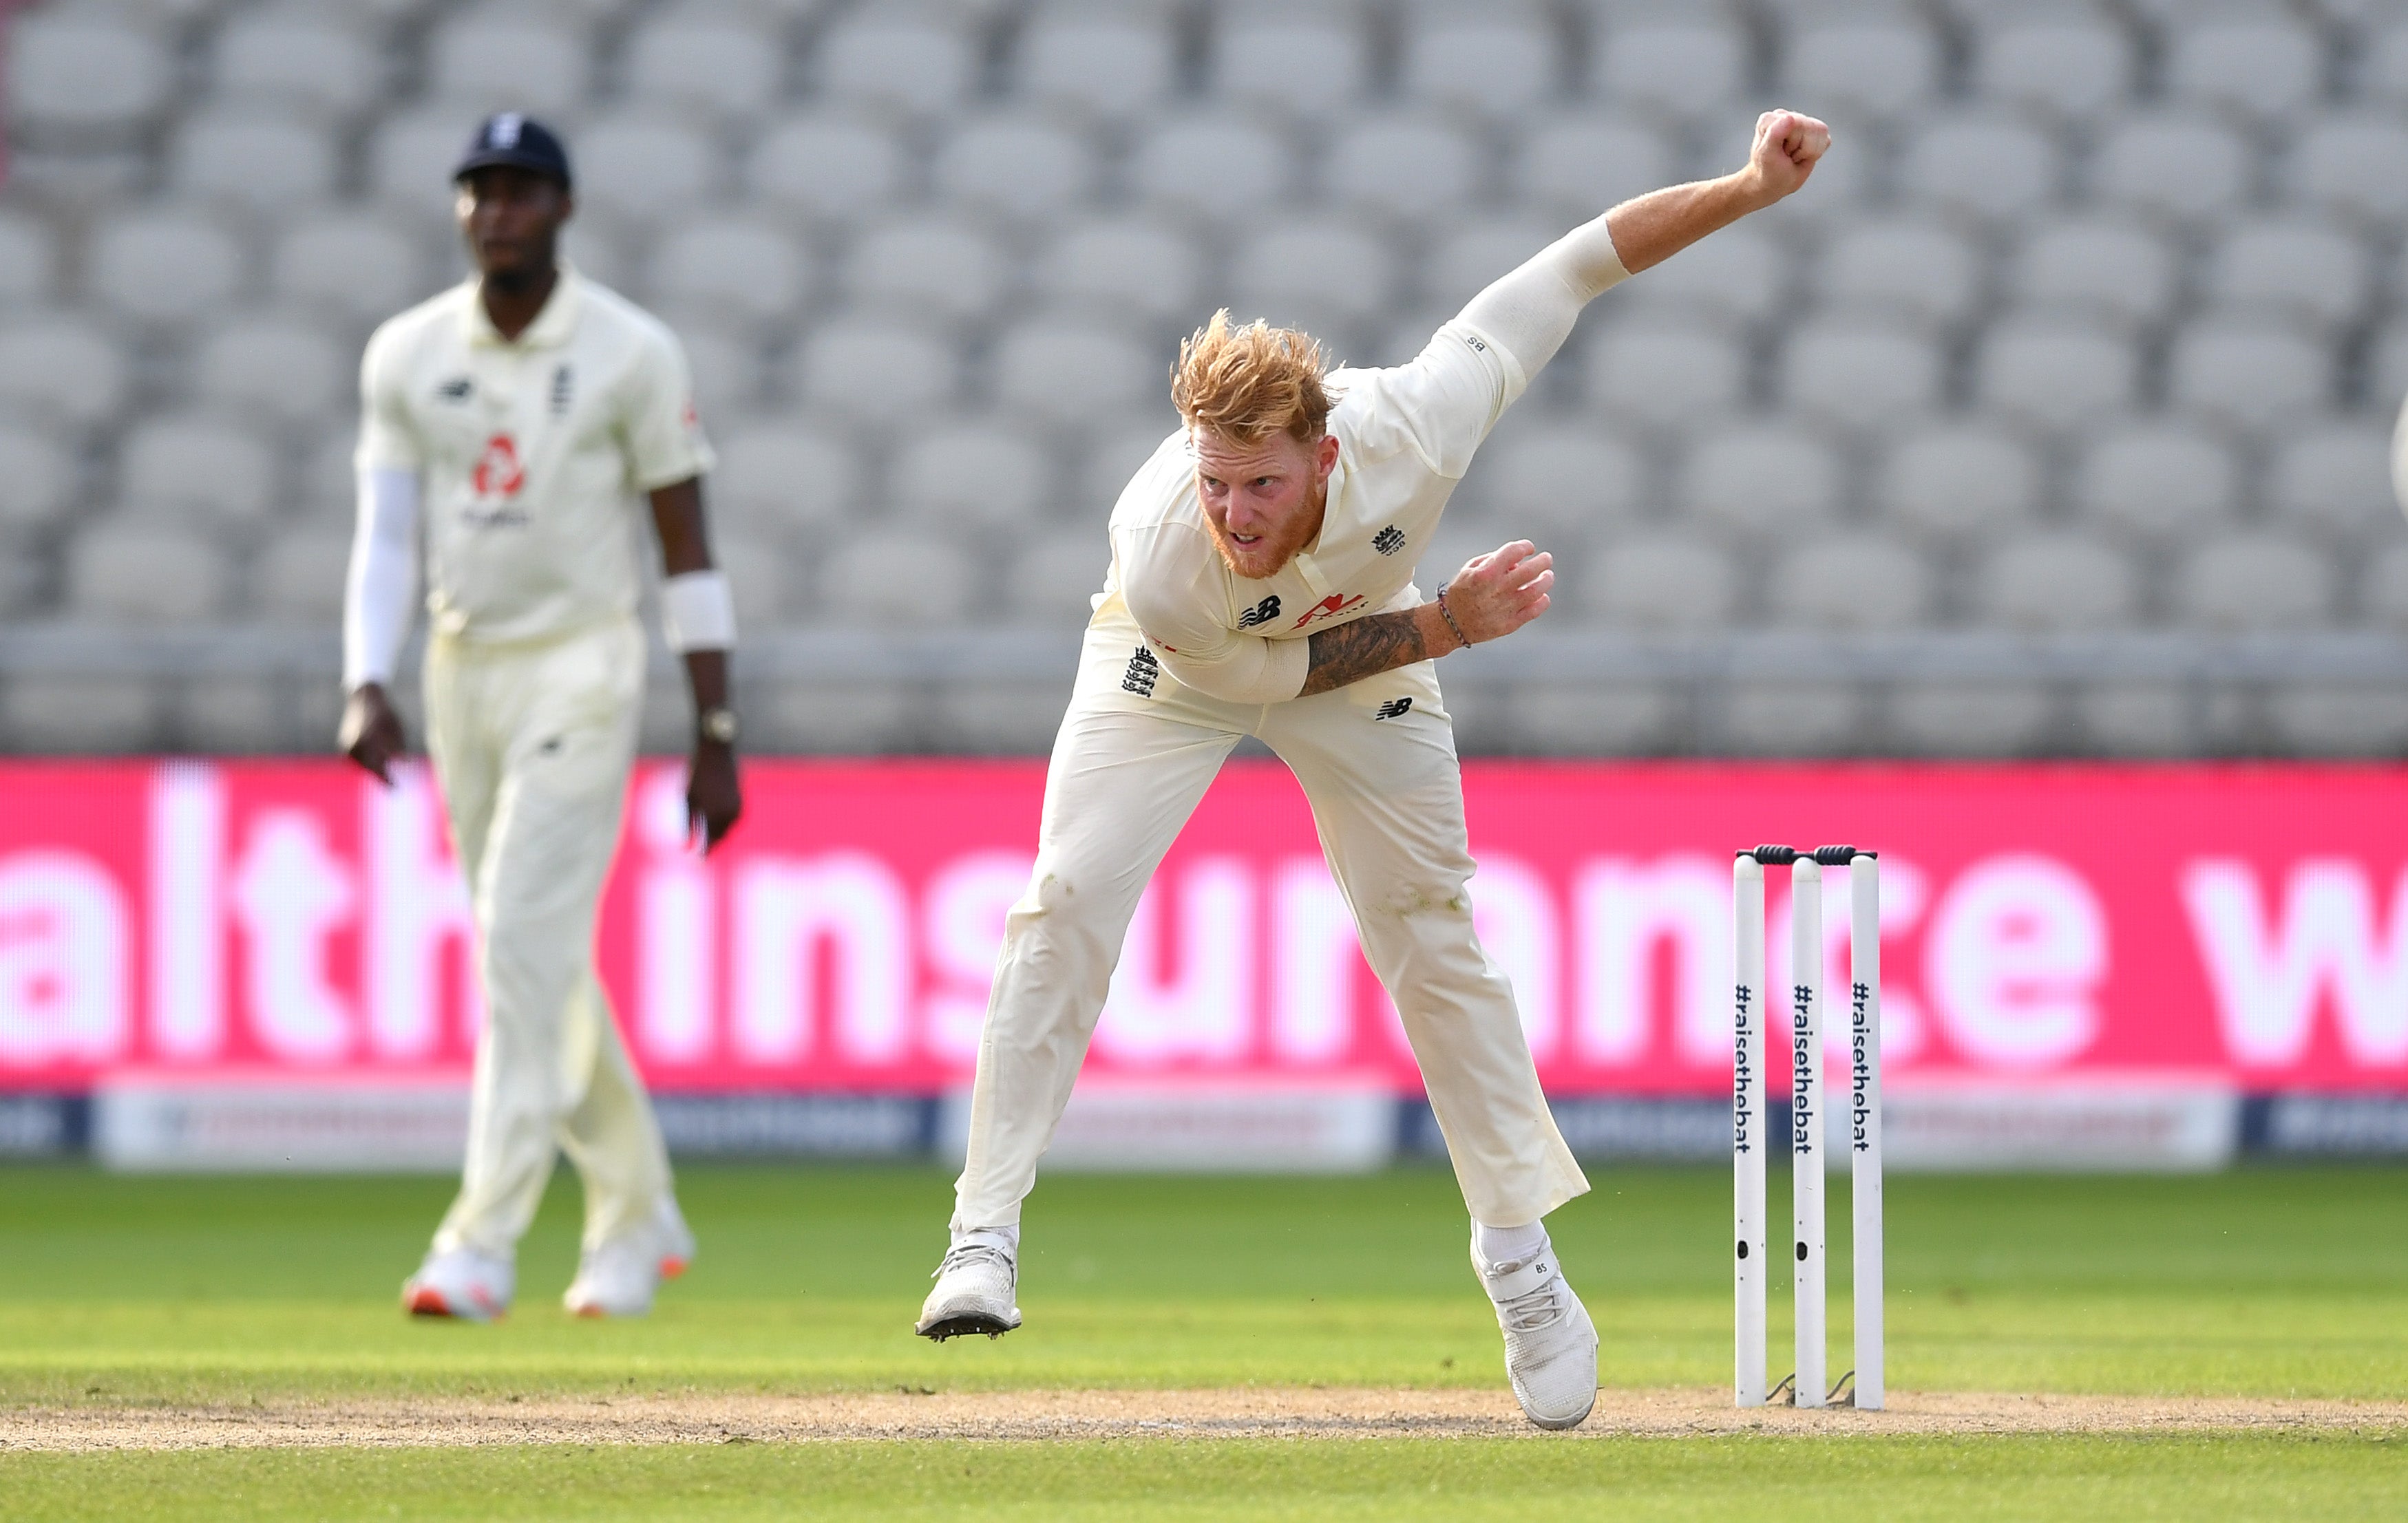 Ben Stokes of England bowls against Pakistan at Emirates Old Trafford